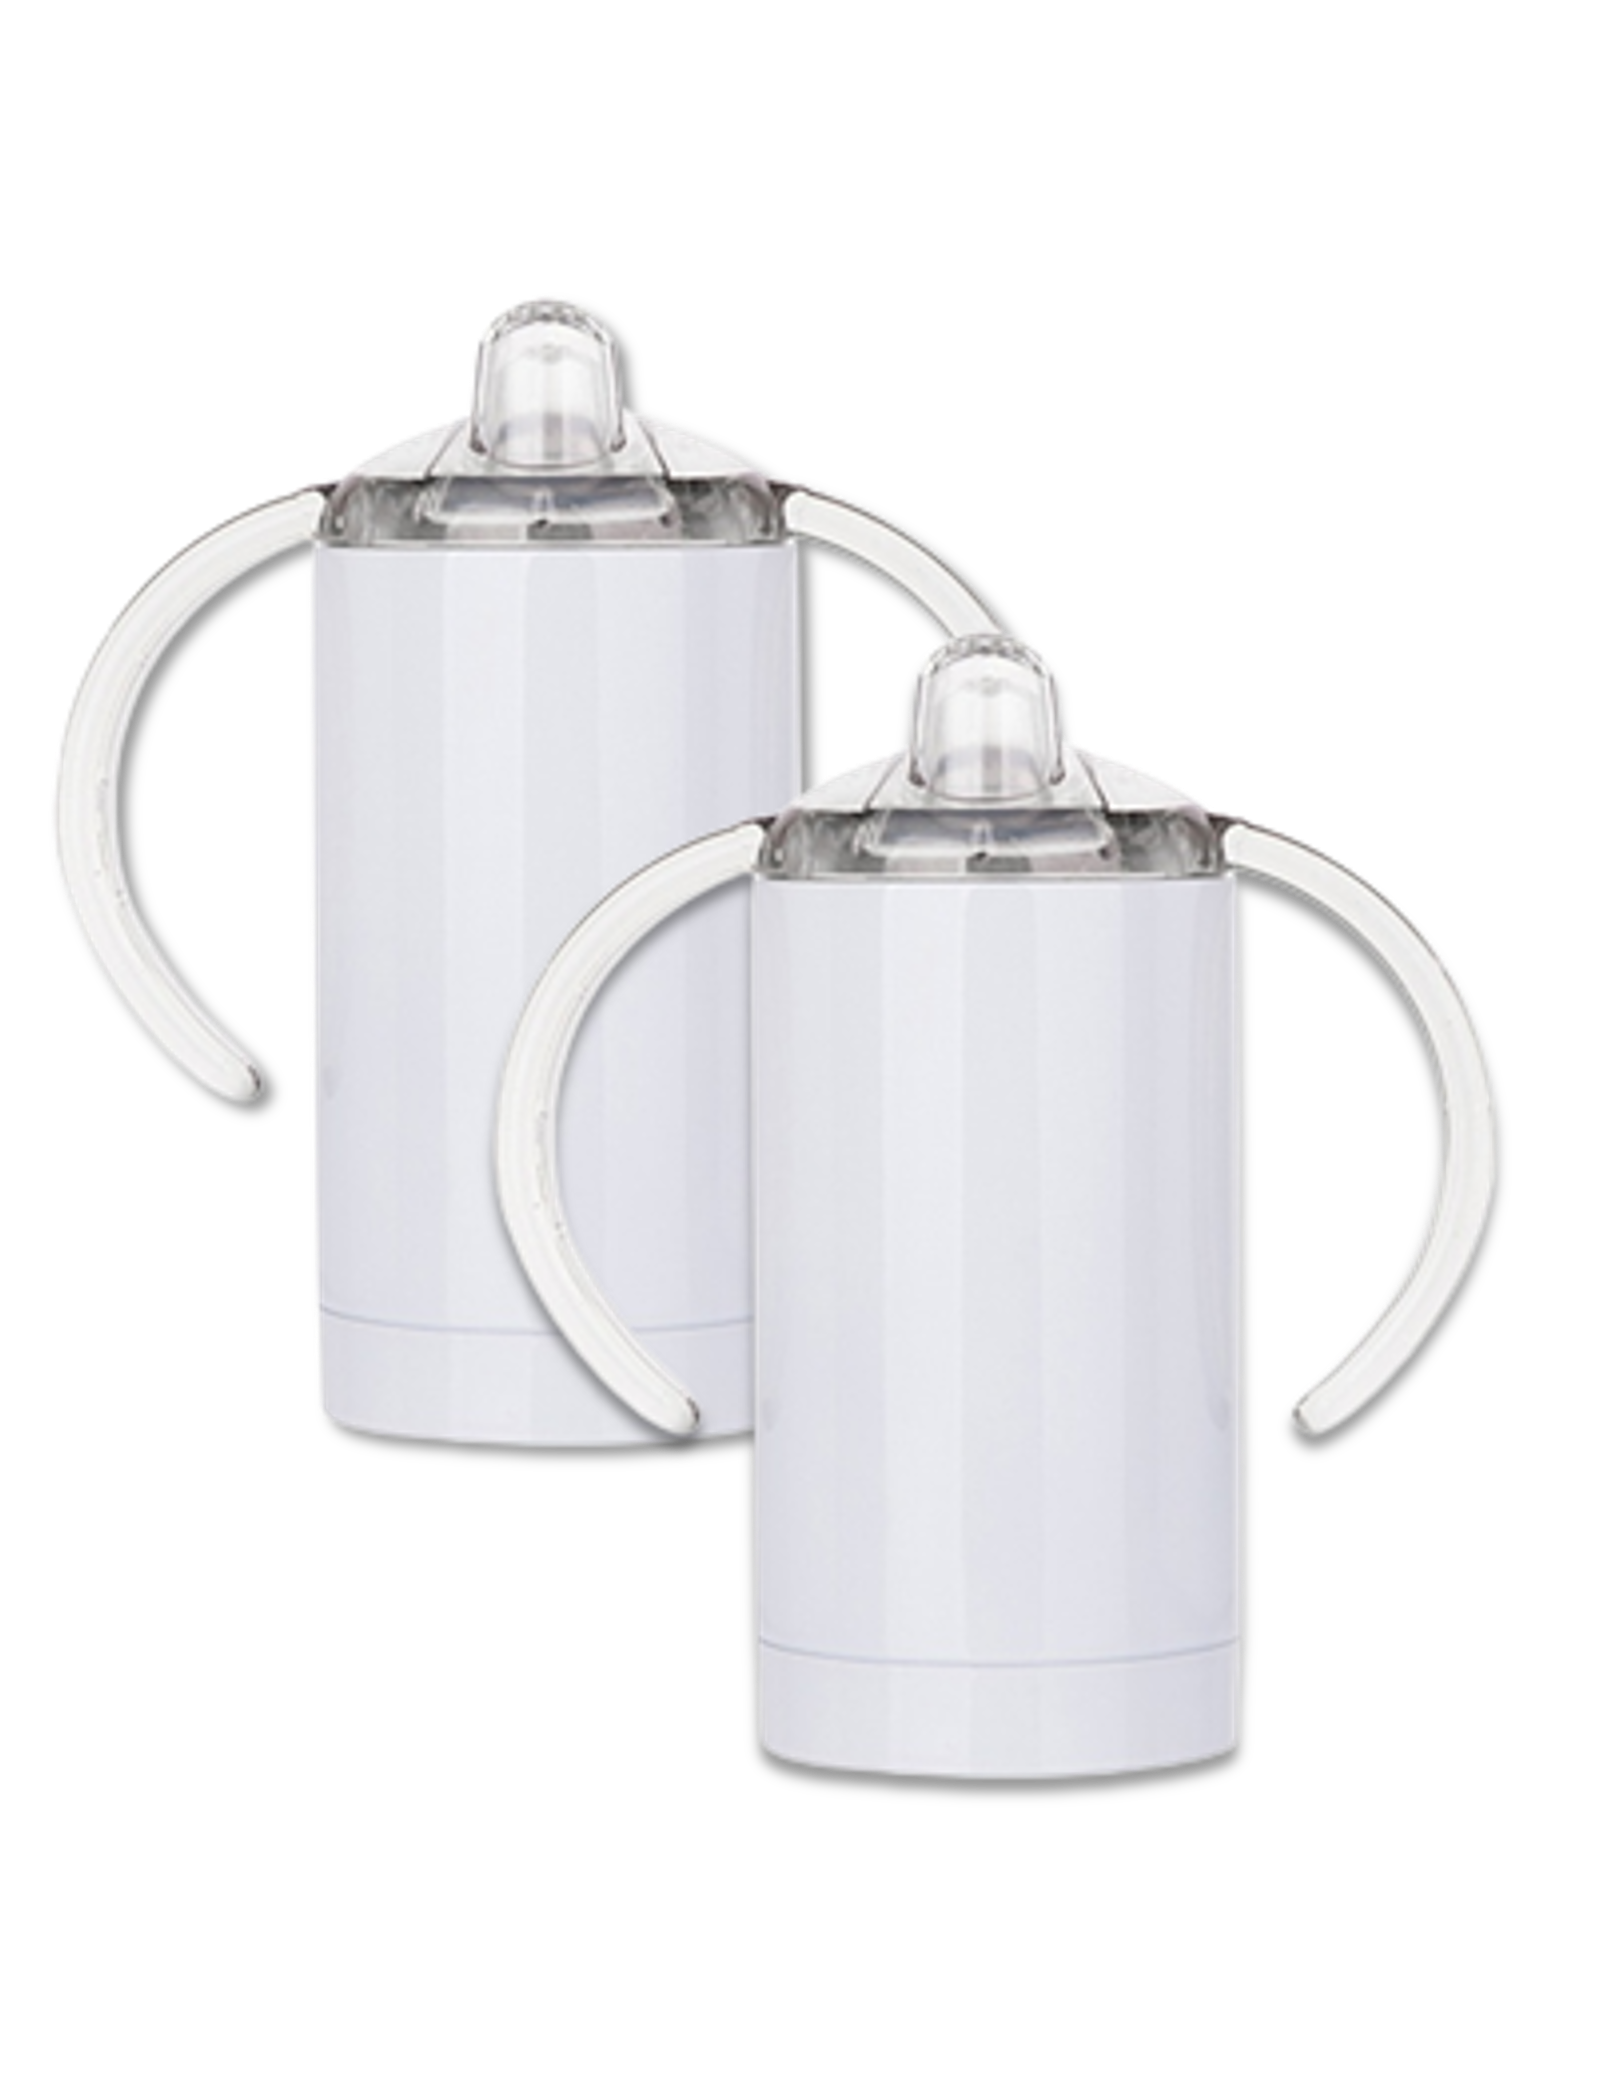 13oz Stainless Steel Sublimation Sippy Cup - 2 Pack.